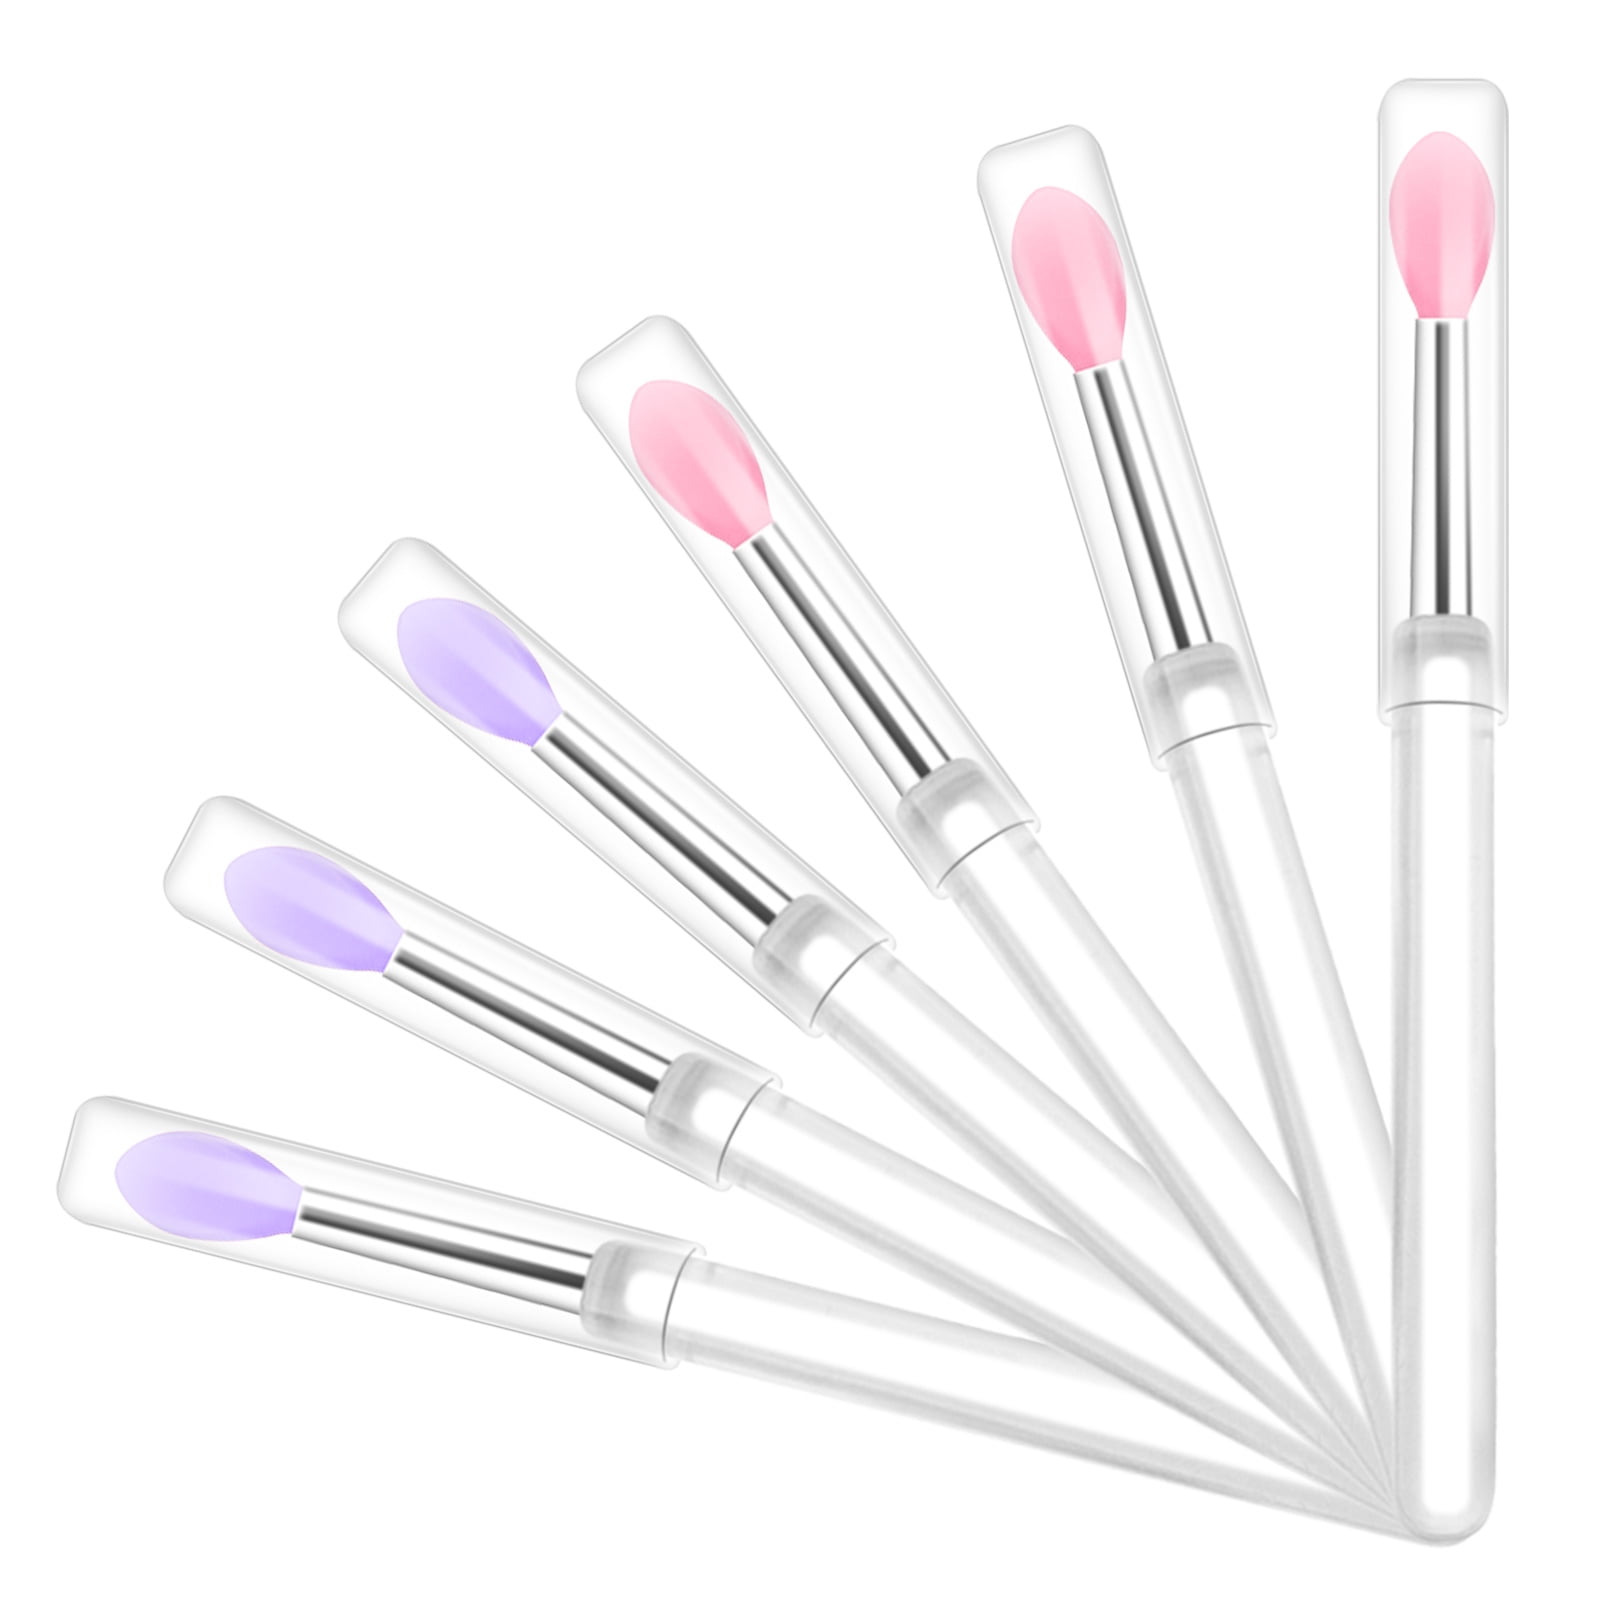 Spove Silicone Lip Brush Makeup Eyebrow Lipstick Brushes Applicator  Cosmetic Brush Set Silicone Brushes Wands Fit Balm Mask Oil 12pcs 